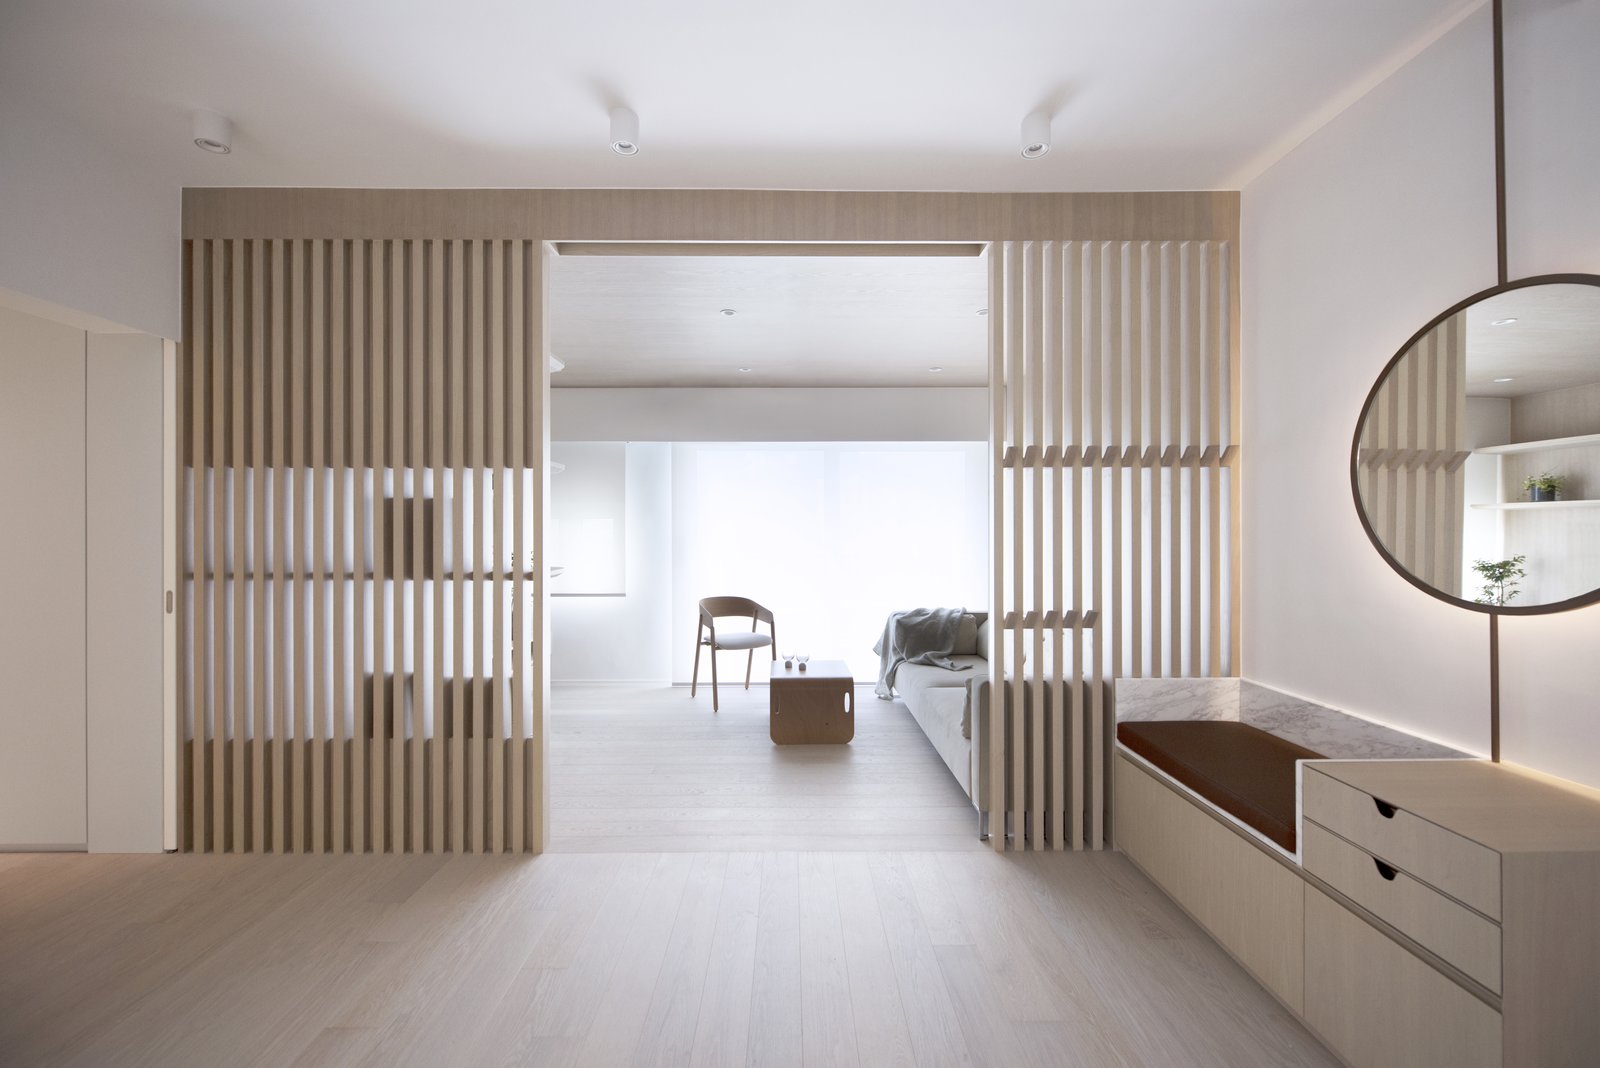 The slatted dividing wall creates a distinction between the living room and the entryway, which is essentially part of a larger open space that includes the dining area.